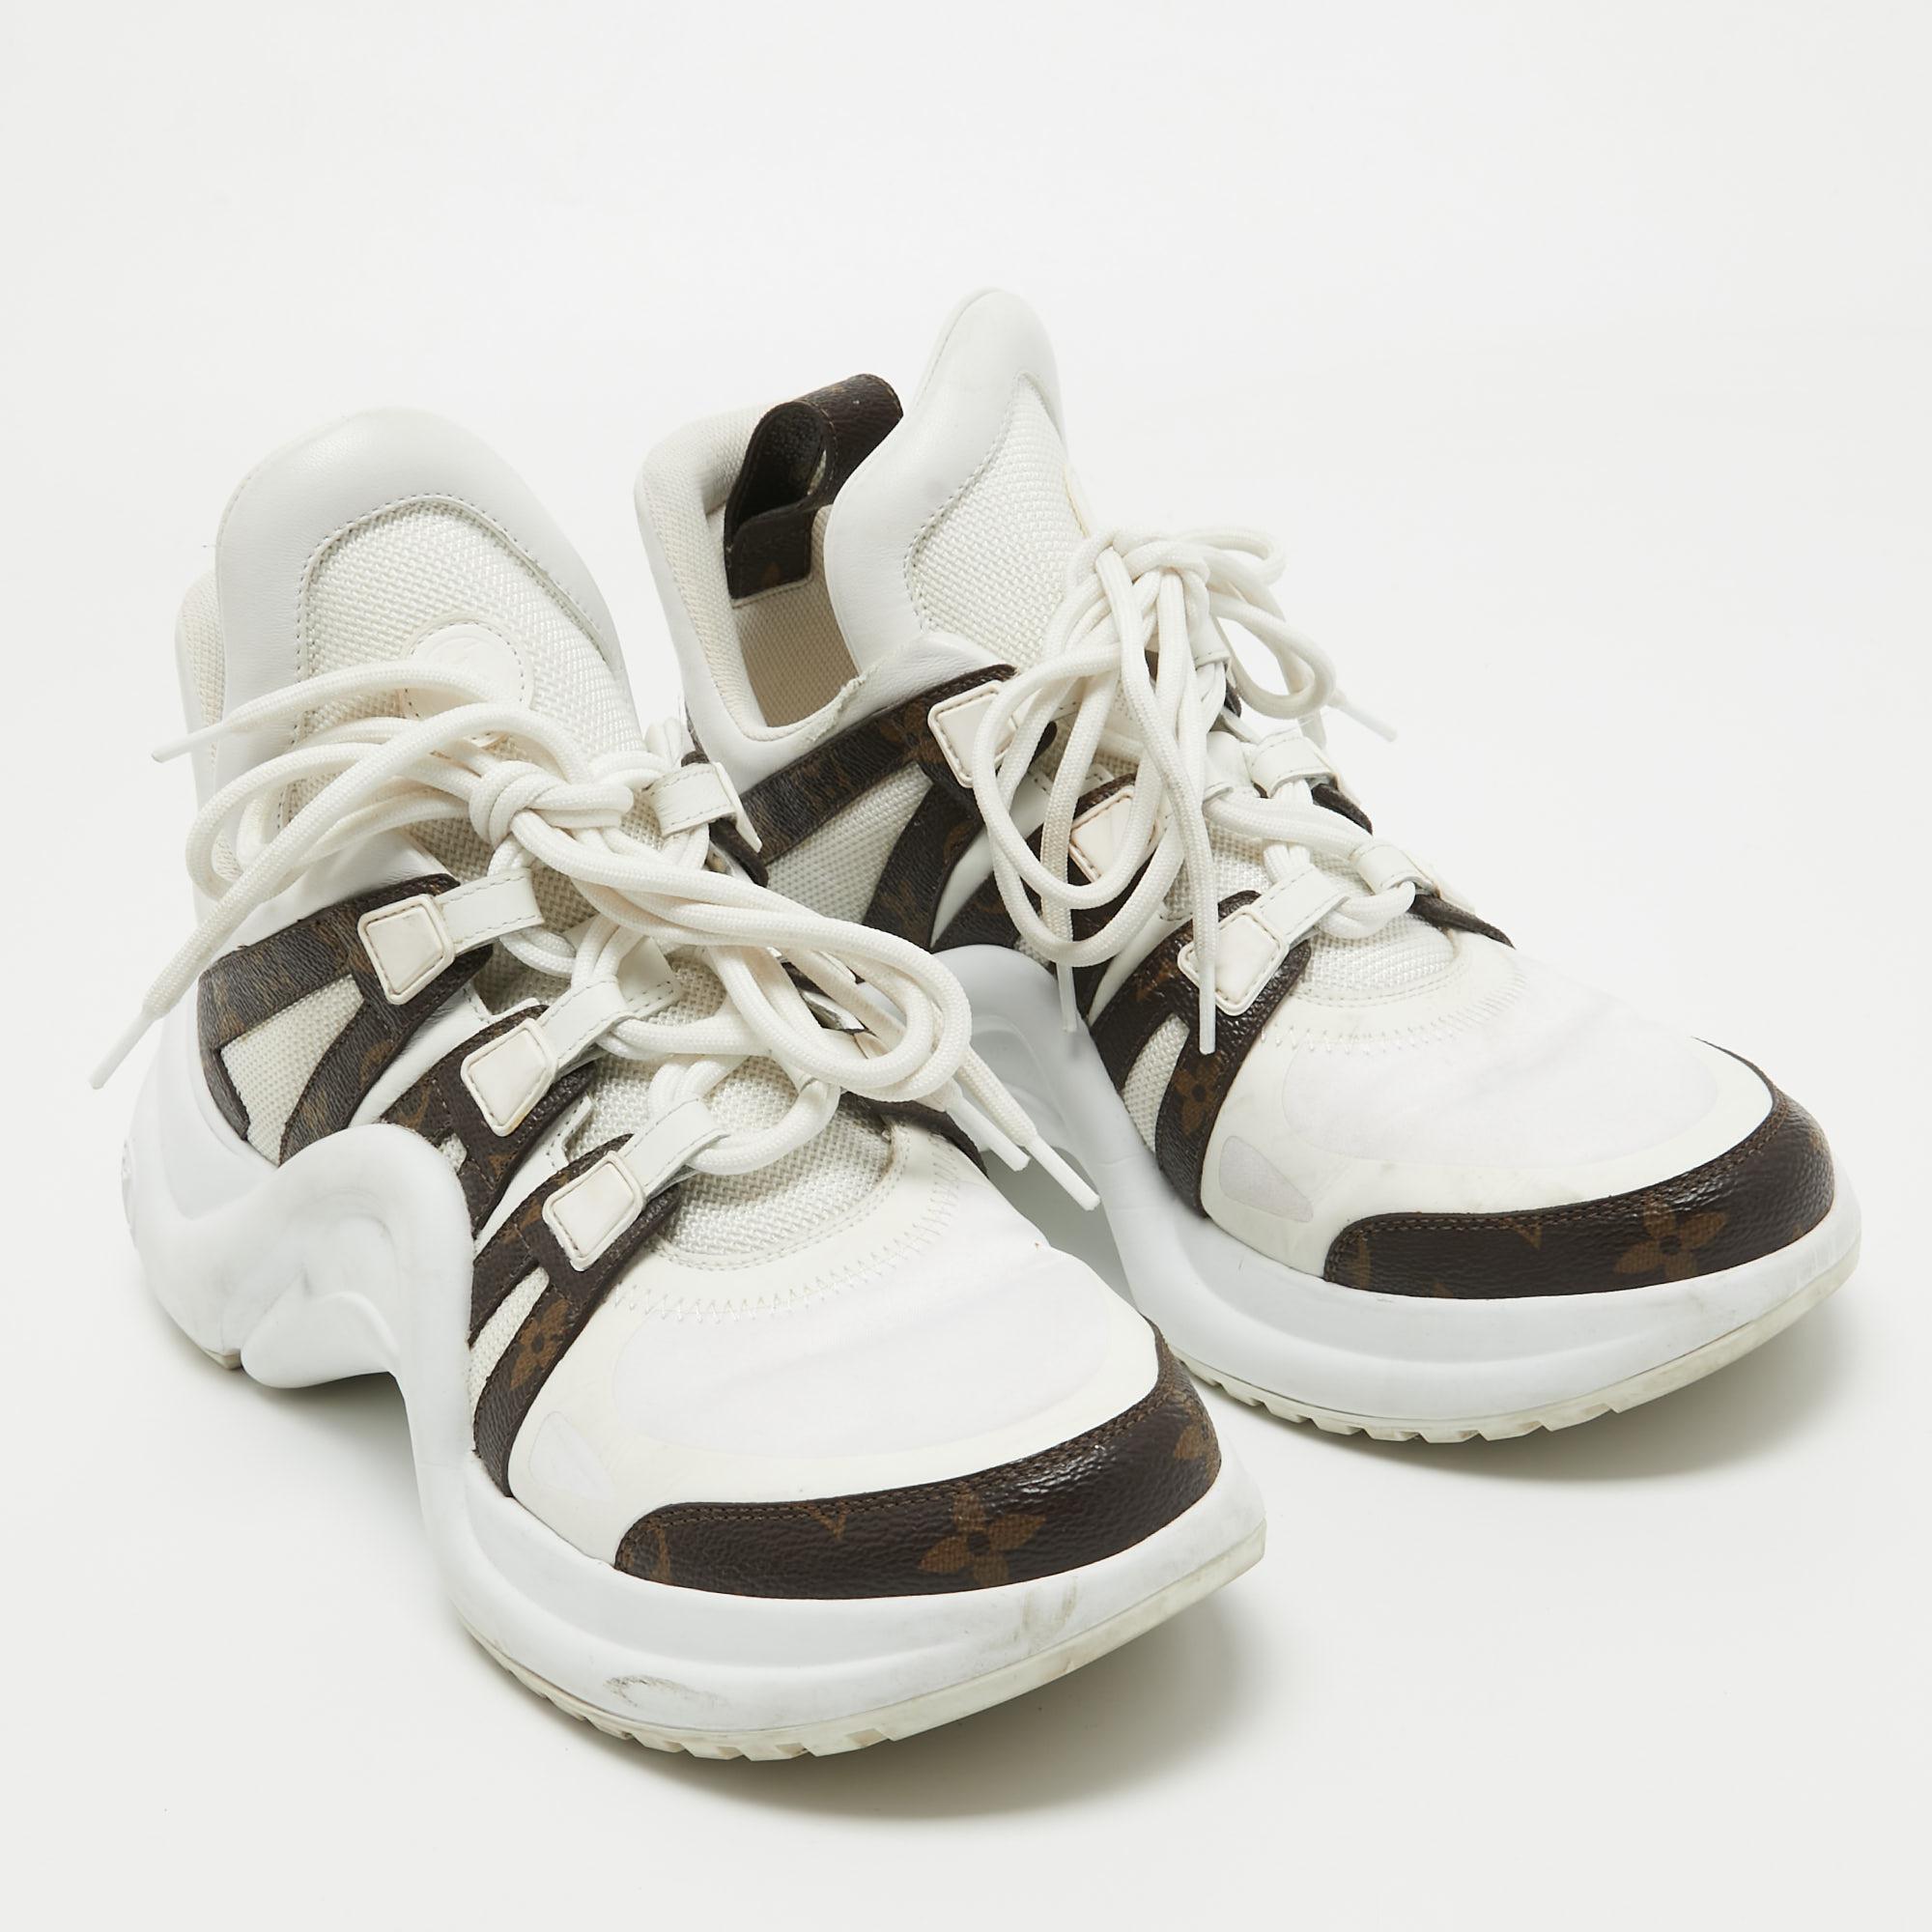 Louis Vuitton White/Brown Nylon and Monogram Canvas Archlight Sneakers Size 41 For Sale 2